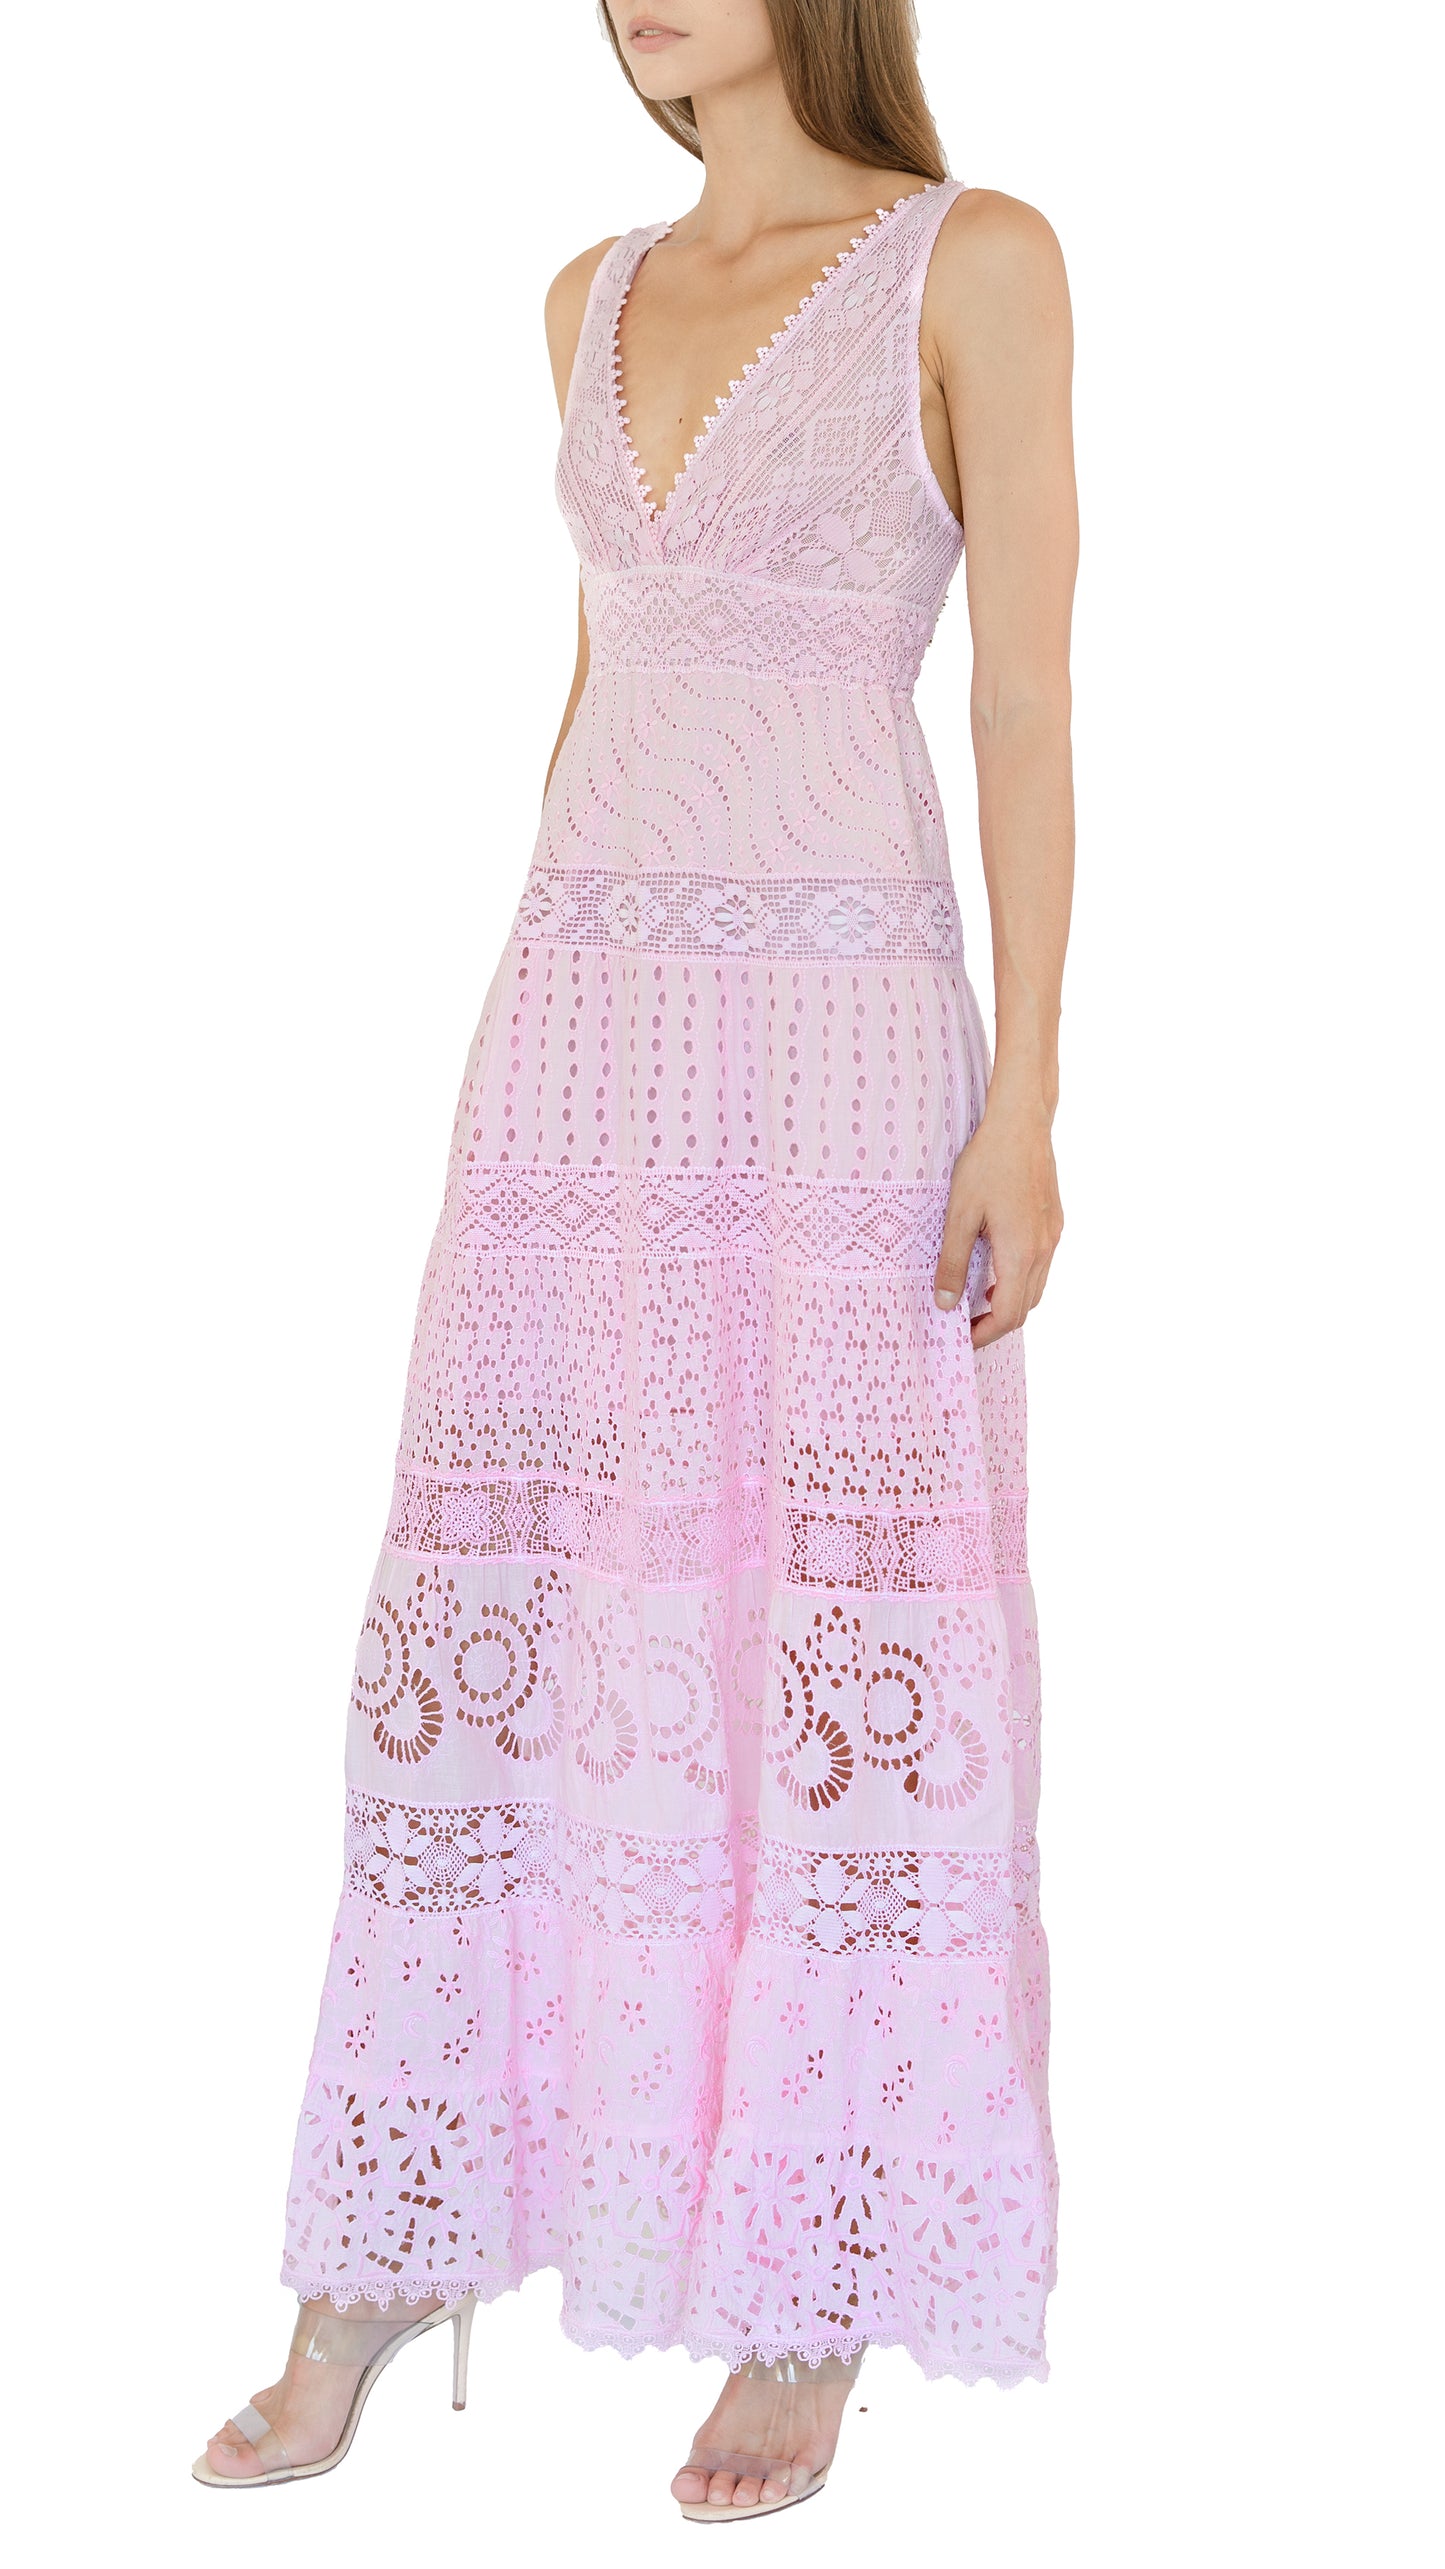 Temptation Positano  Long maxi dress with crochet lace trim, a scallop plunge v-neckline with a smocked empire waist and pom pom trim in pink